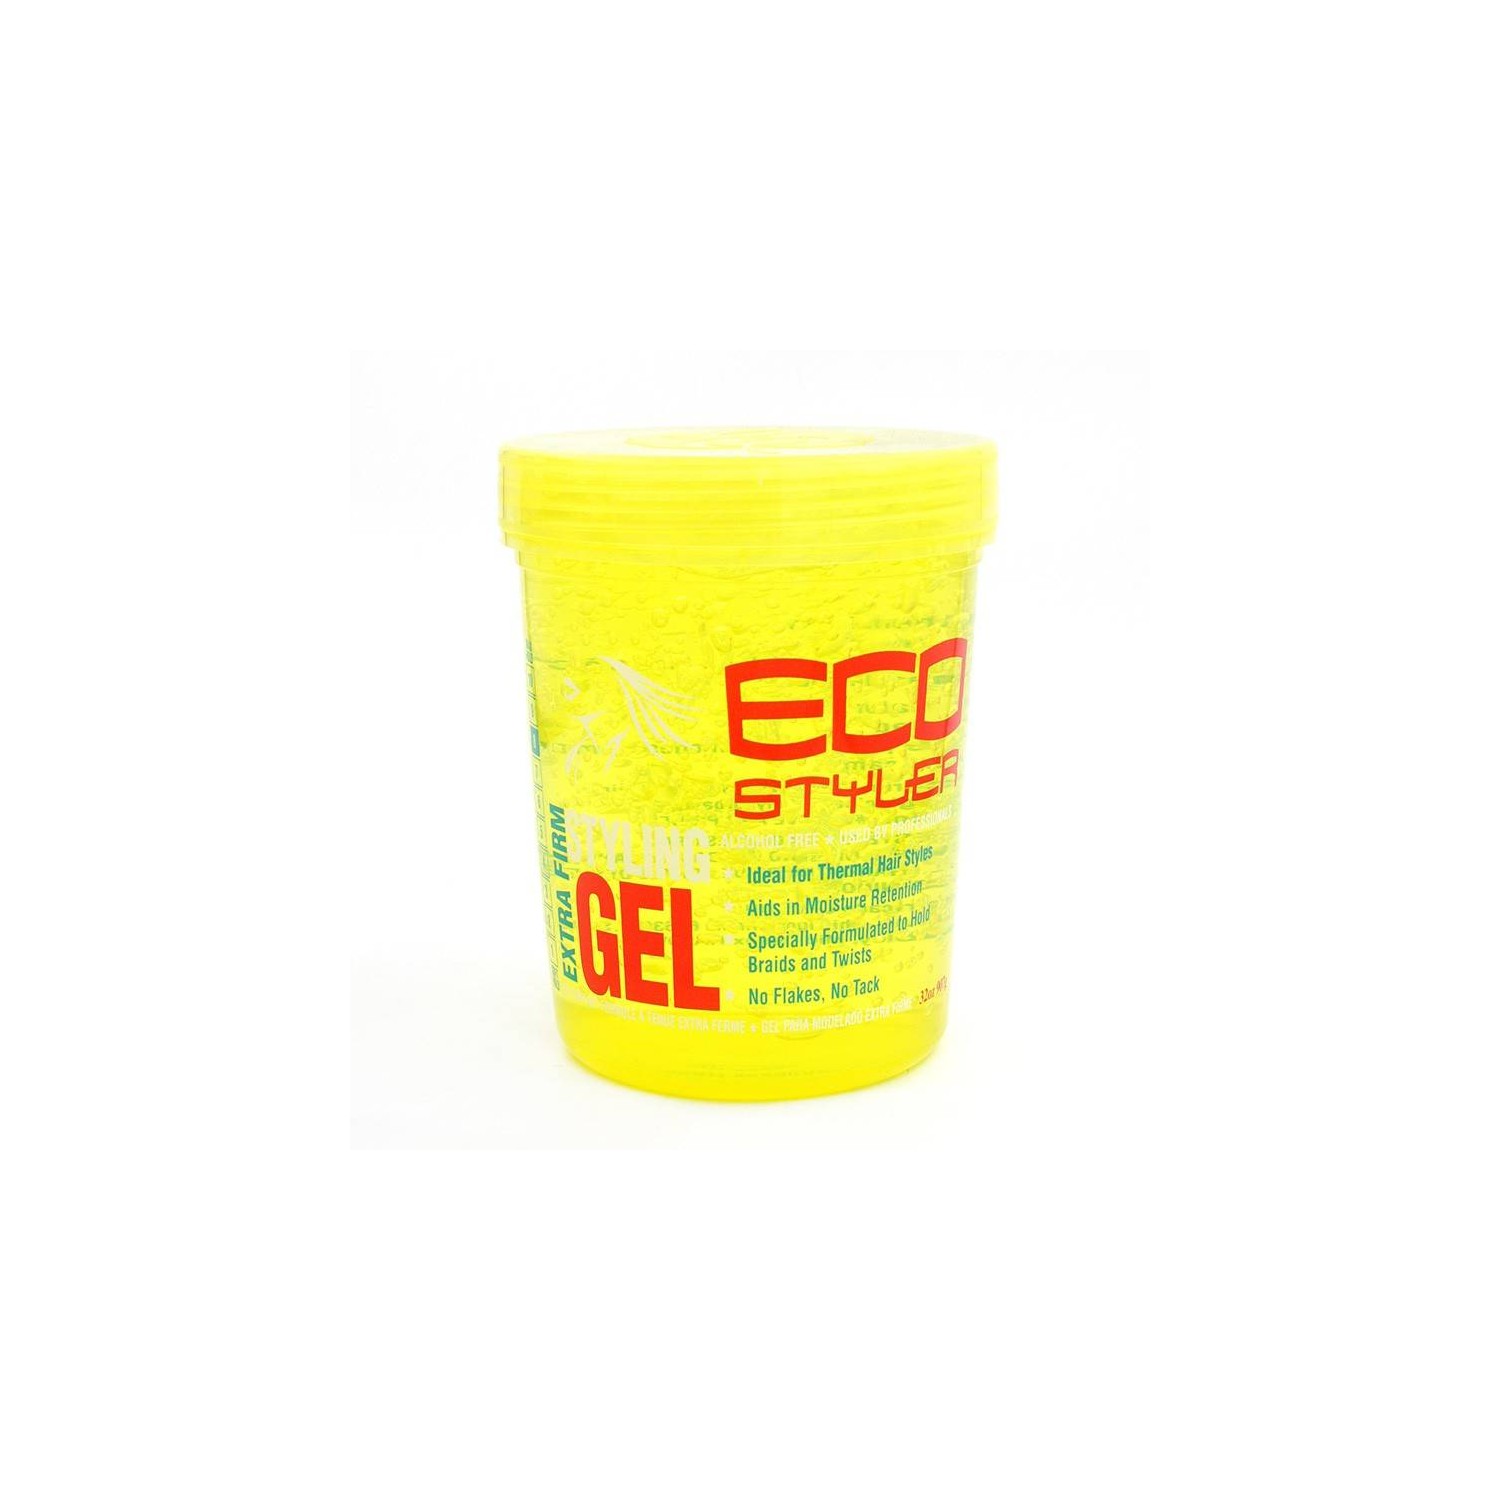 Eco Styler Styling Gel Color Yellow 907 Gr